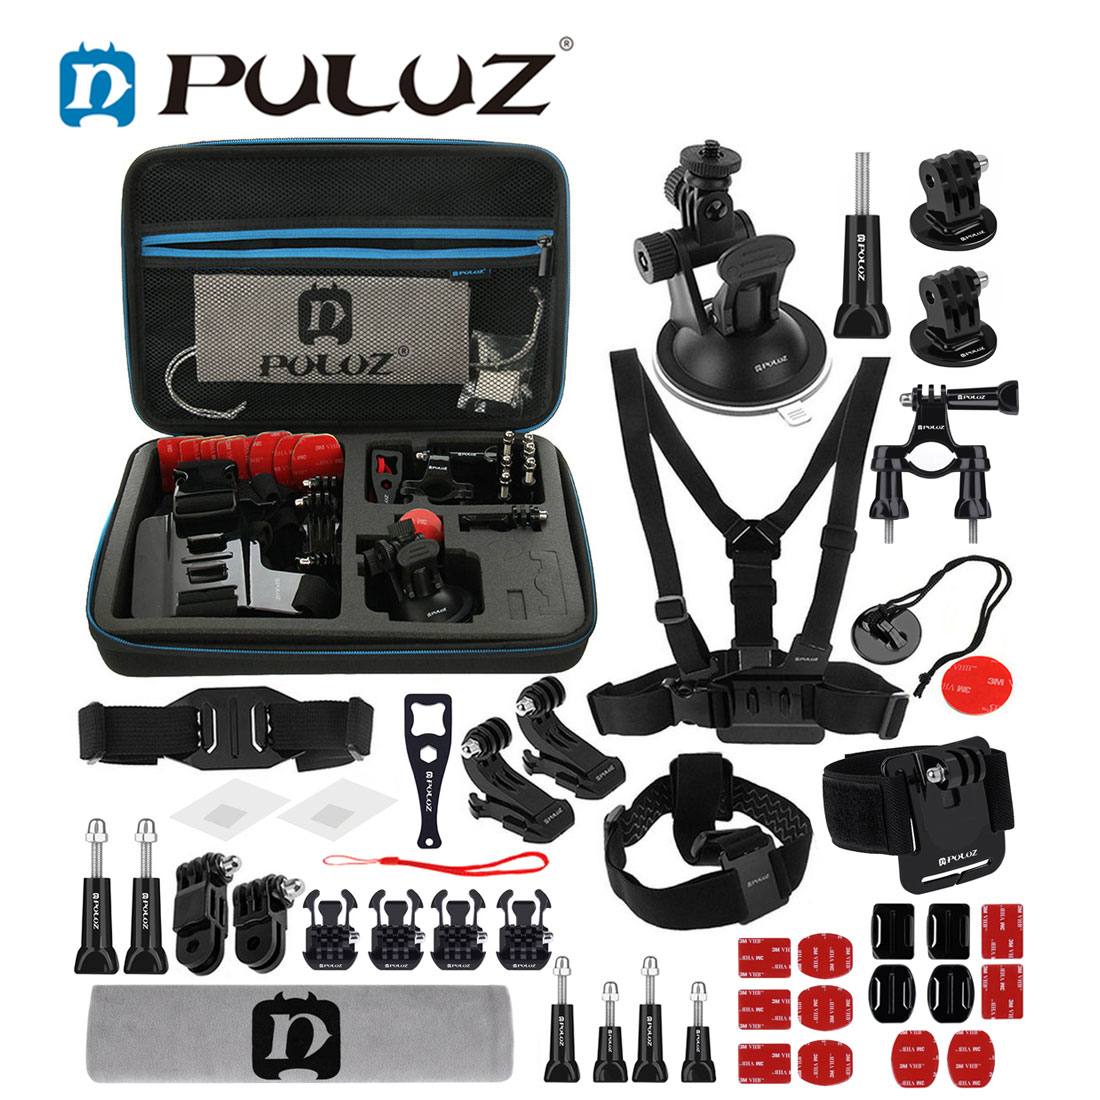 PULUZ 45 in 1 Accessories Ultimate Combo Kits with EVA Case for GoPro HERO7 /6 /5 /5 Session /4 Session /4 /3+ /3 /2 /1, Xiaoyi and Other Action Cameras